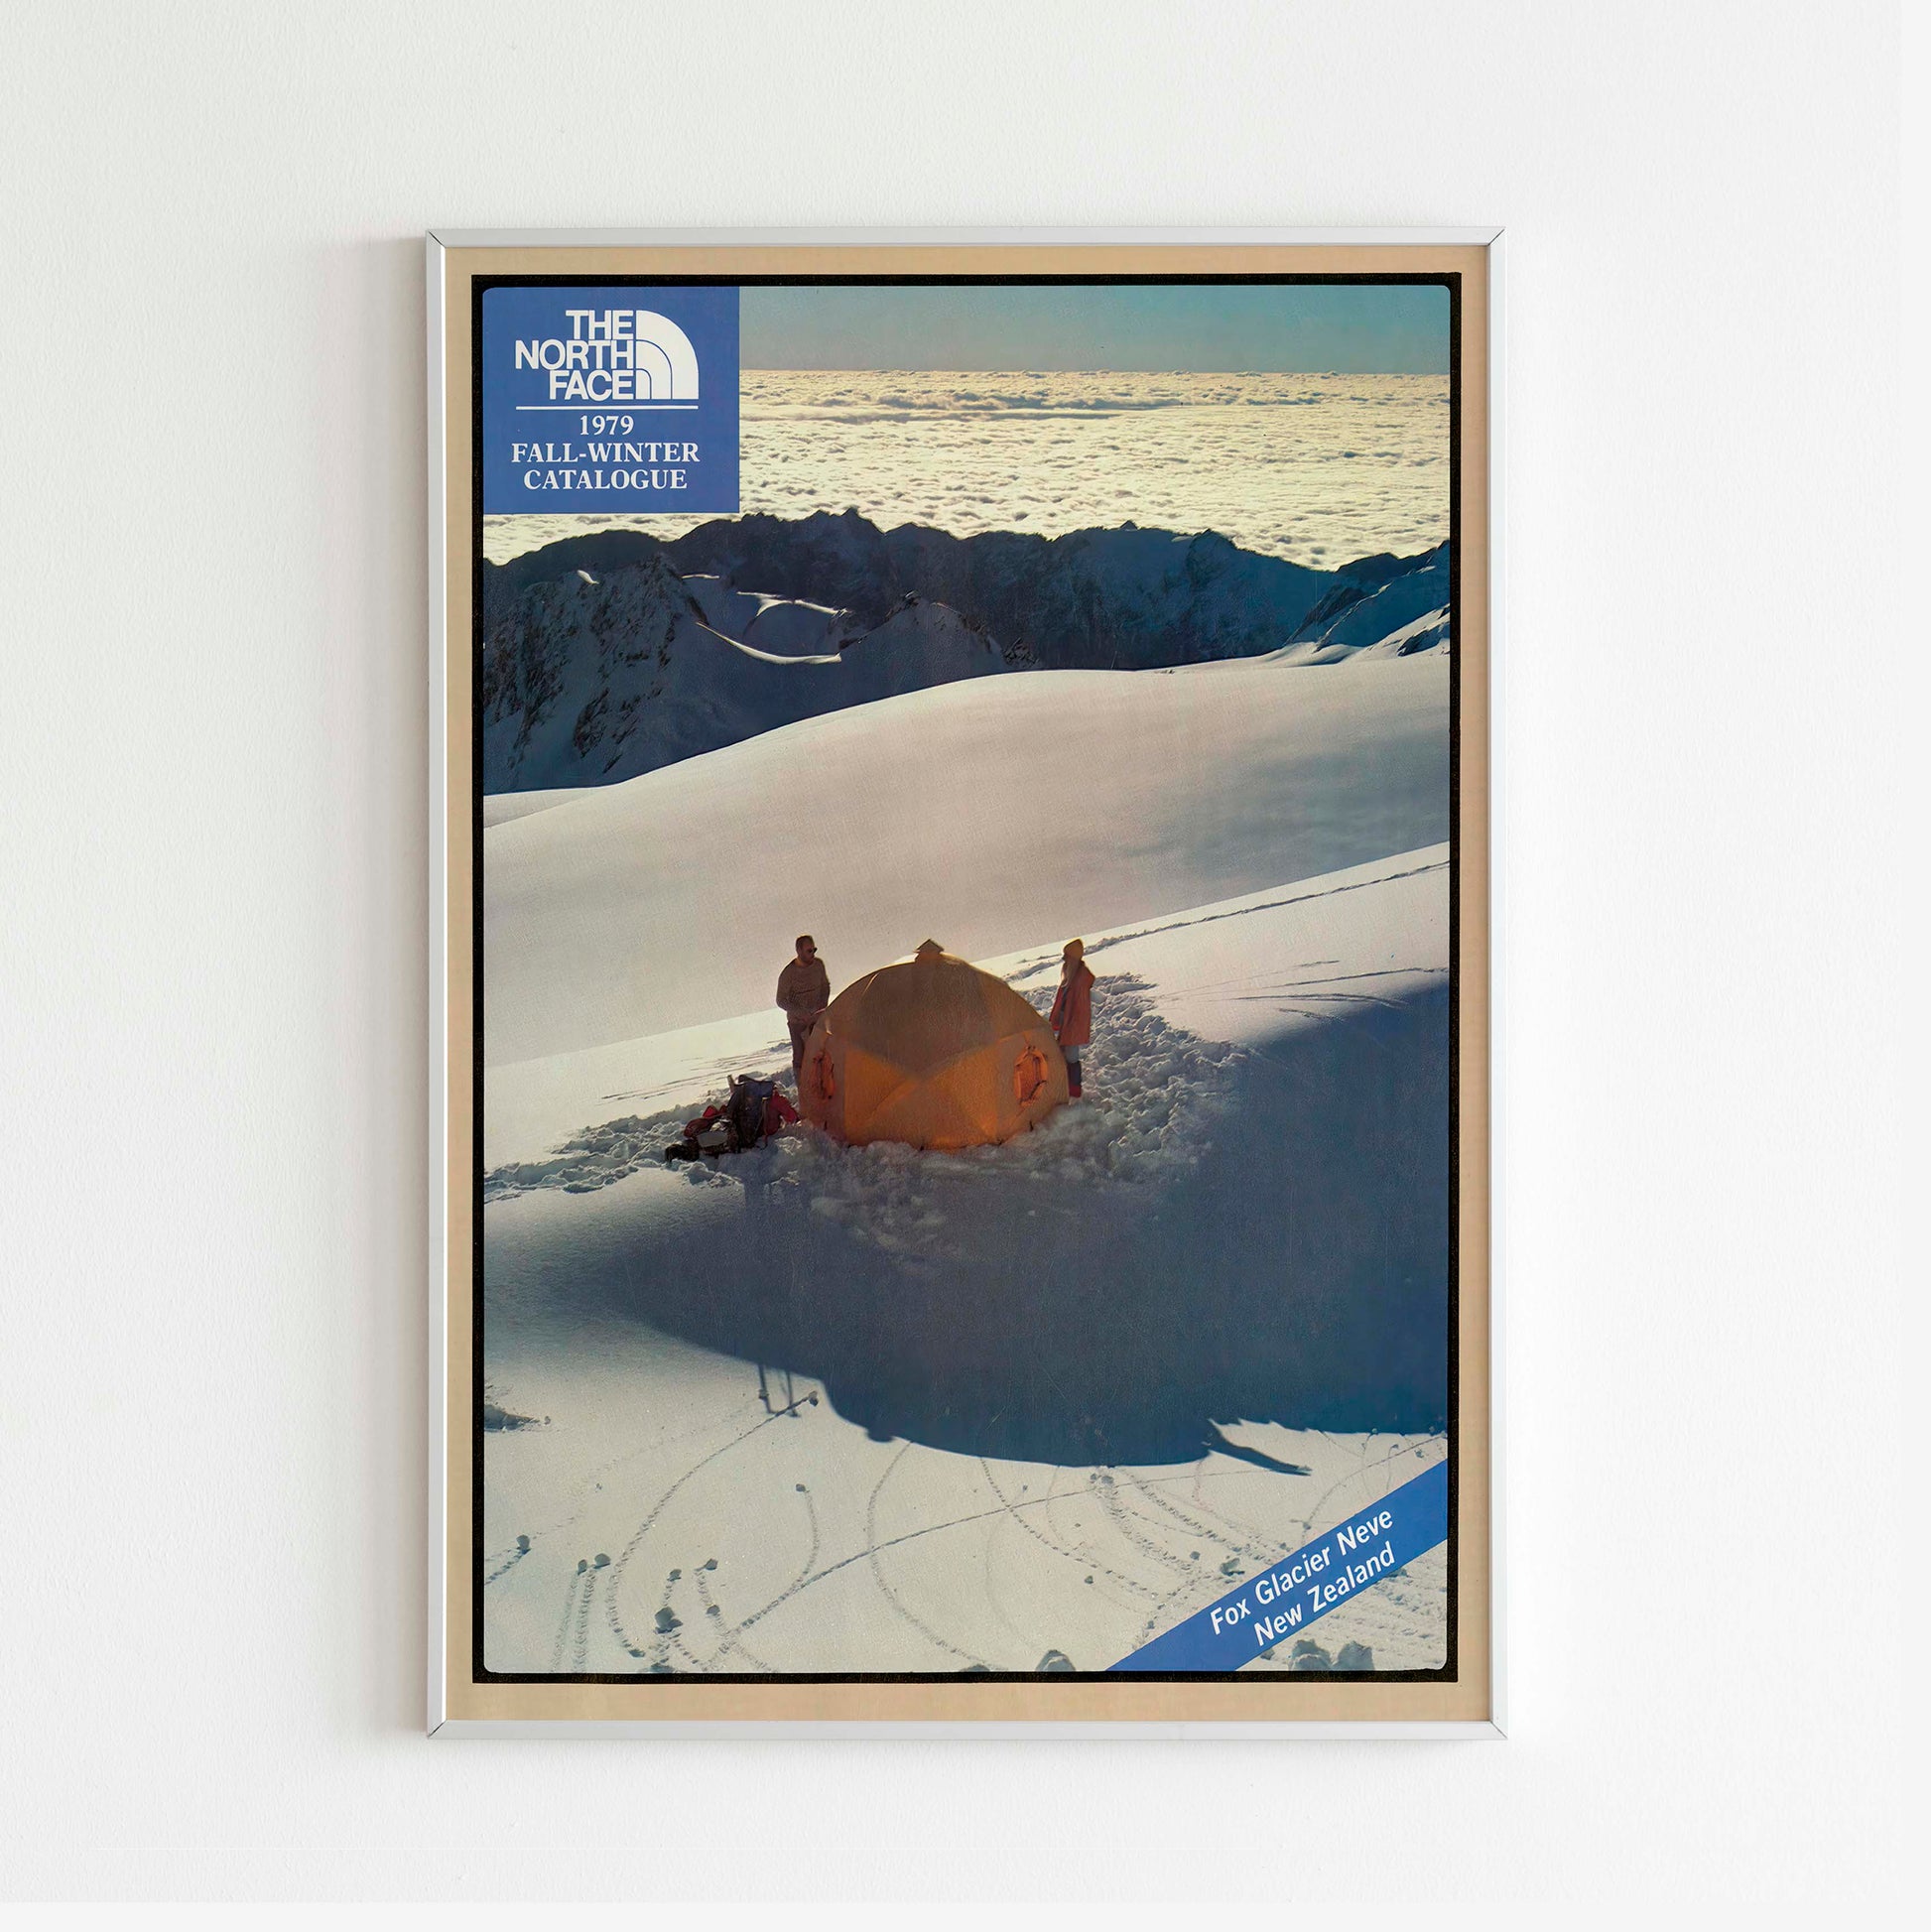 The North Face 1979 Fall/Winter Magazine Front Cover Poster, Vintage Outdoor Print, Retro Wall Art, Journal Advertisement, 70s Style Ad, Explore Seasonal Adventure Nostalgia, Urban Exploration Print